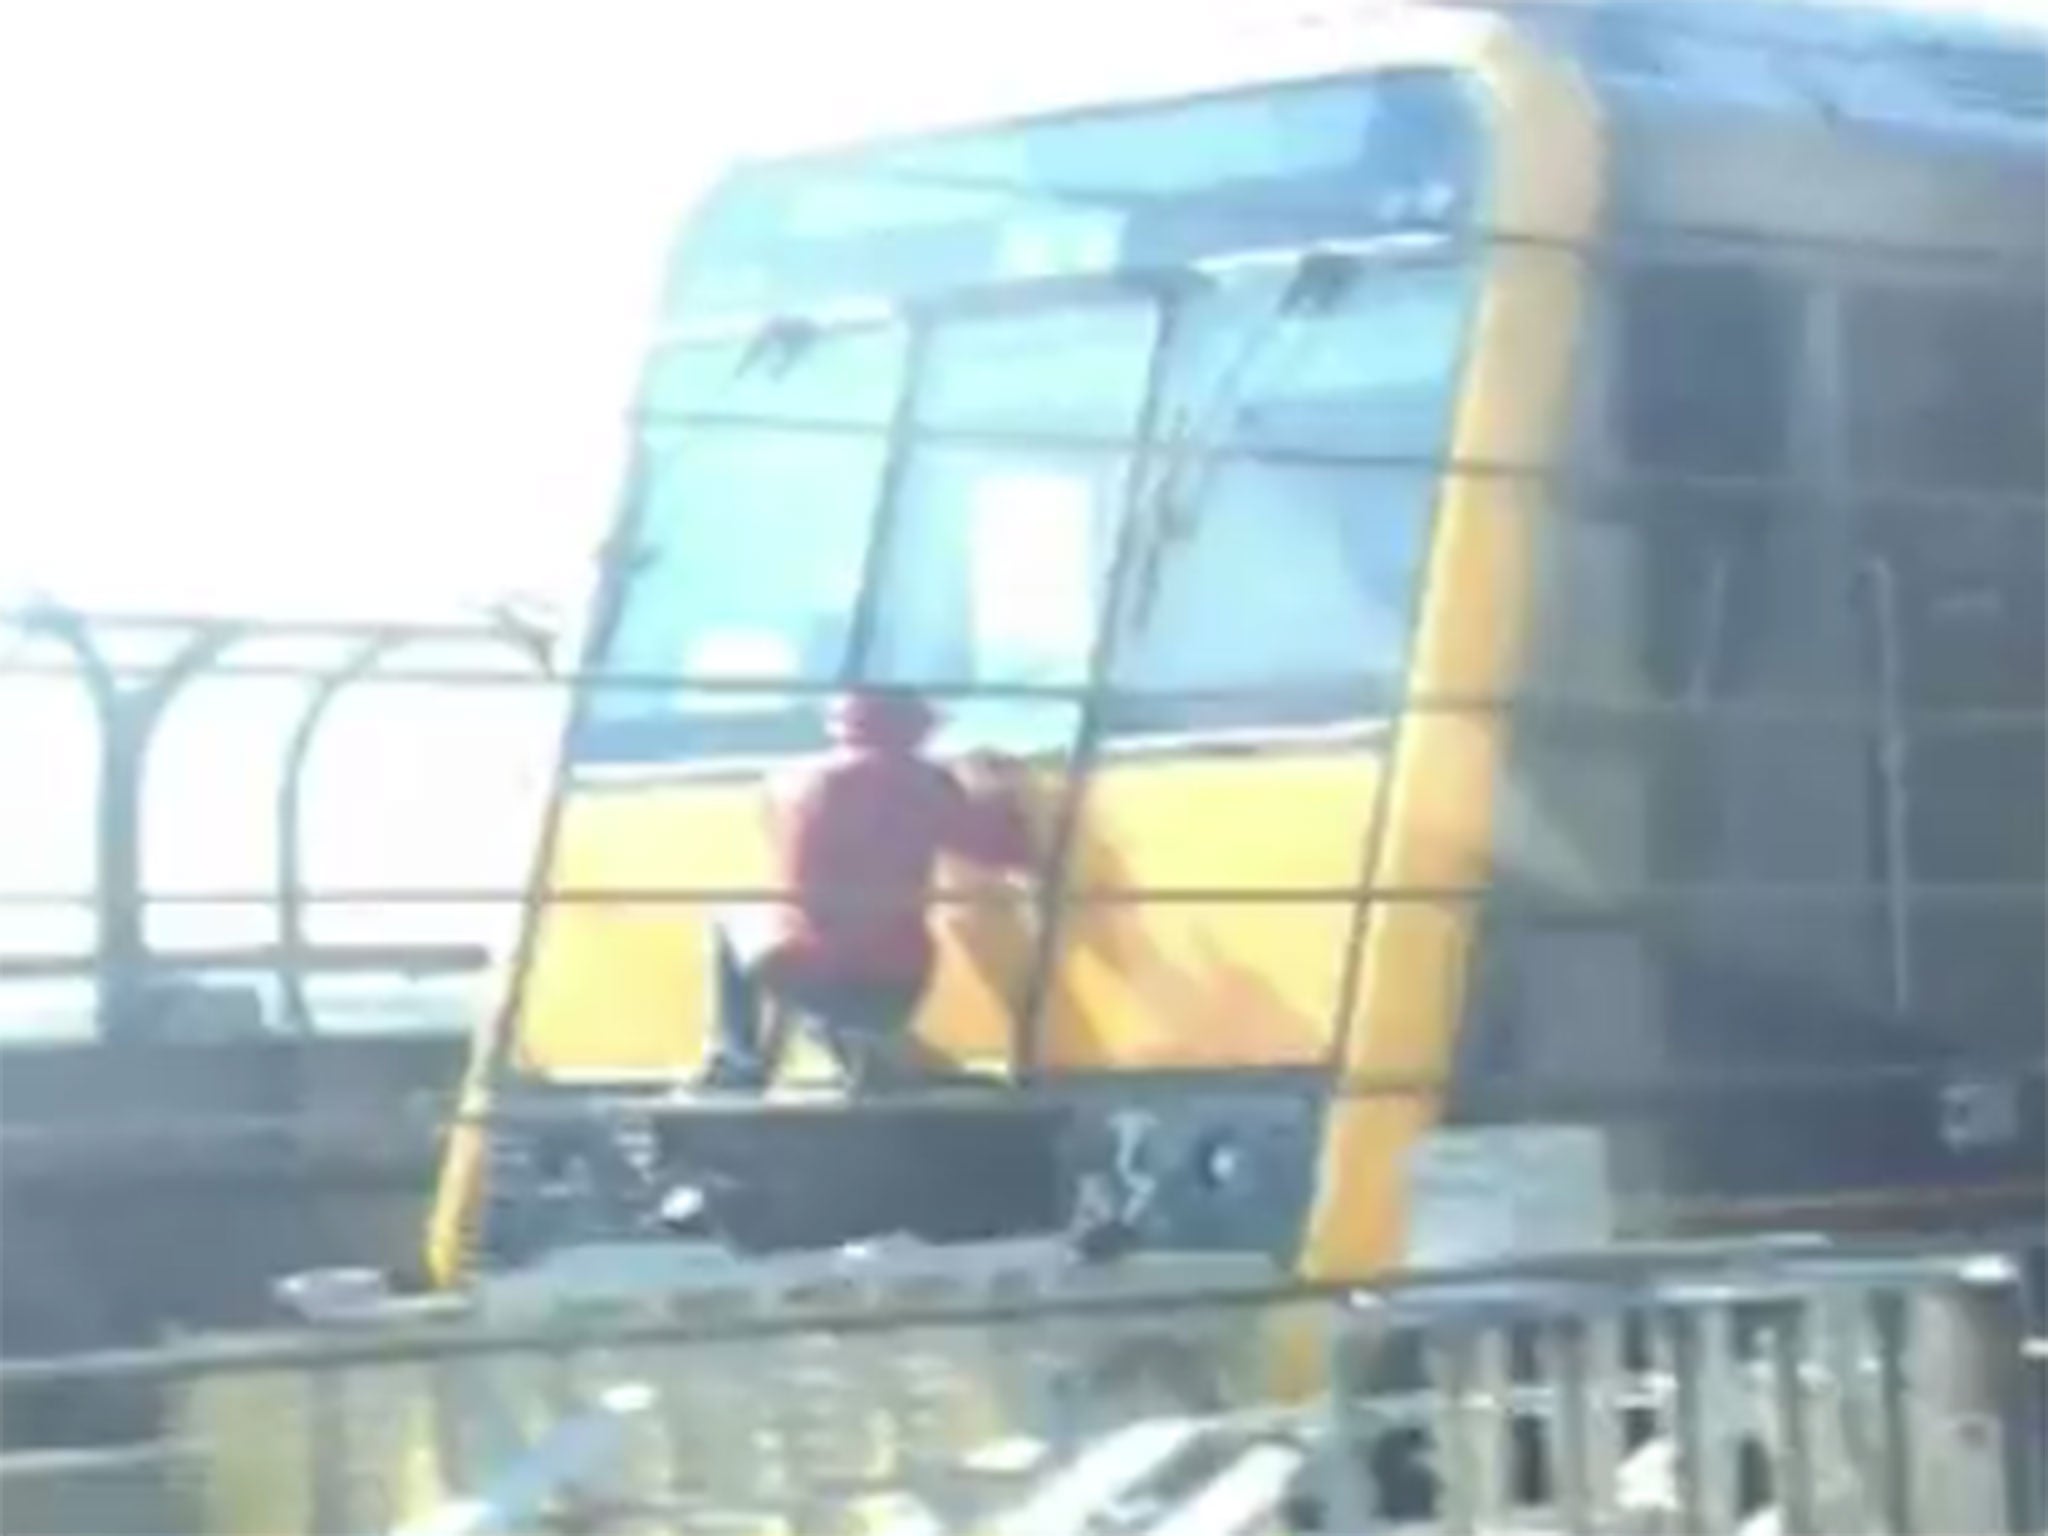 The 15-year-old was caught on camera holding onto the safety door at the back of the train by cameras